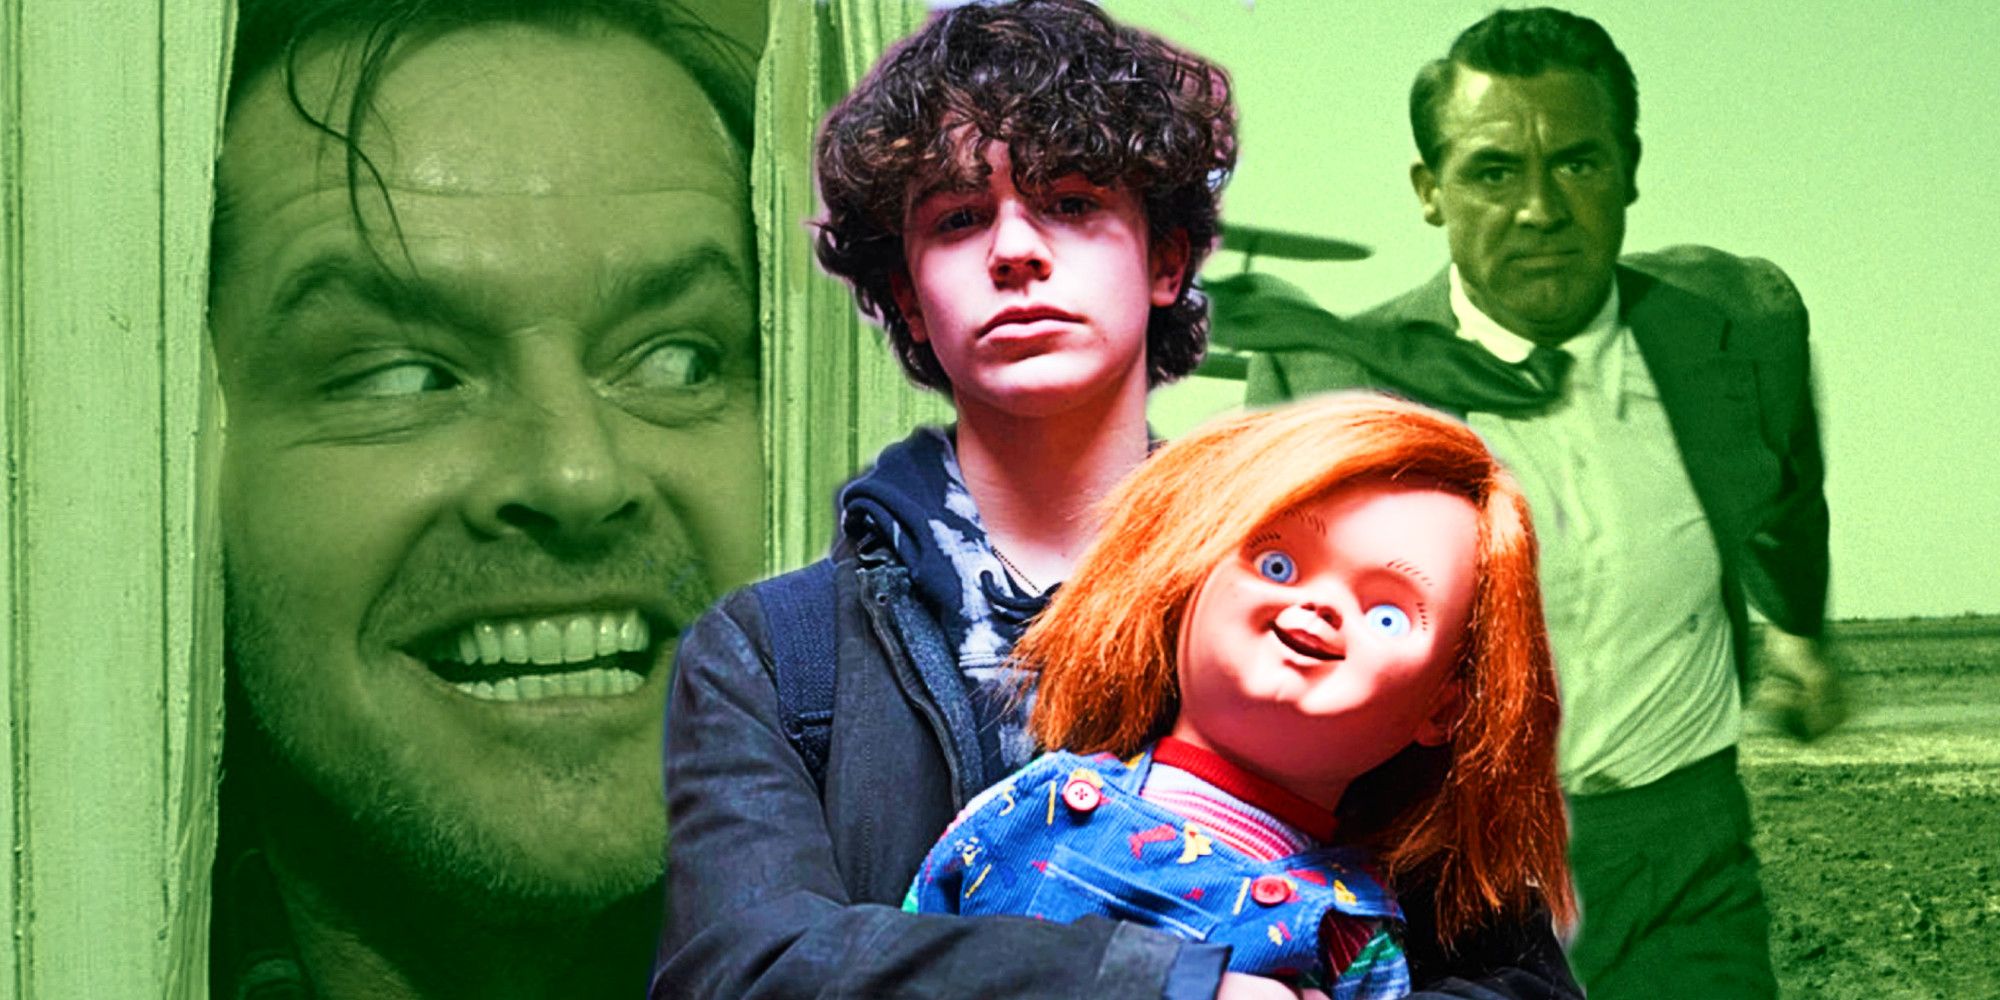 Brad Dourif as Chucky and Zackary Arthur as Jake Wheeler in Chucky, Jack Nicholson as Jack Torrance in The Shining, and Cary Grant as Roger Thornhill in North by Northwest